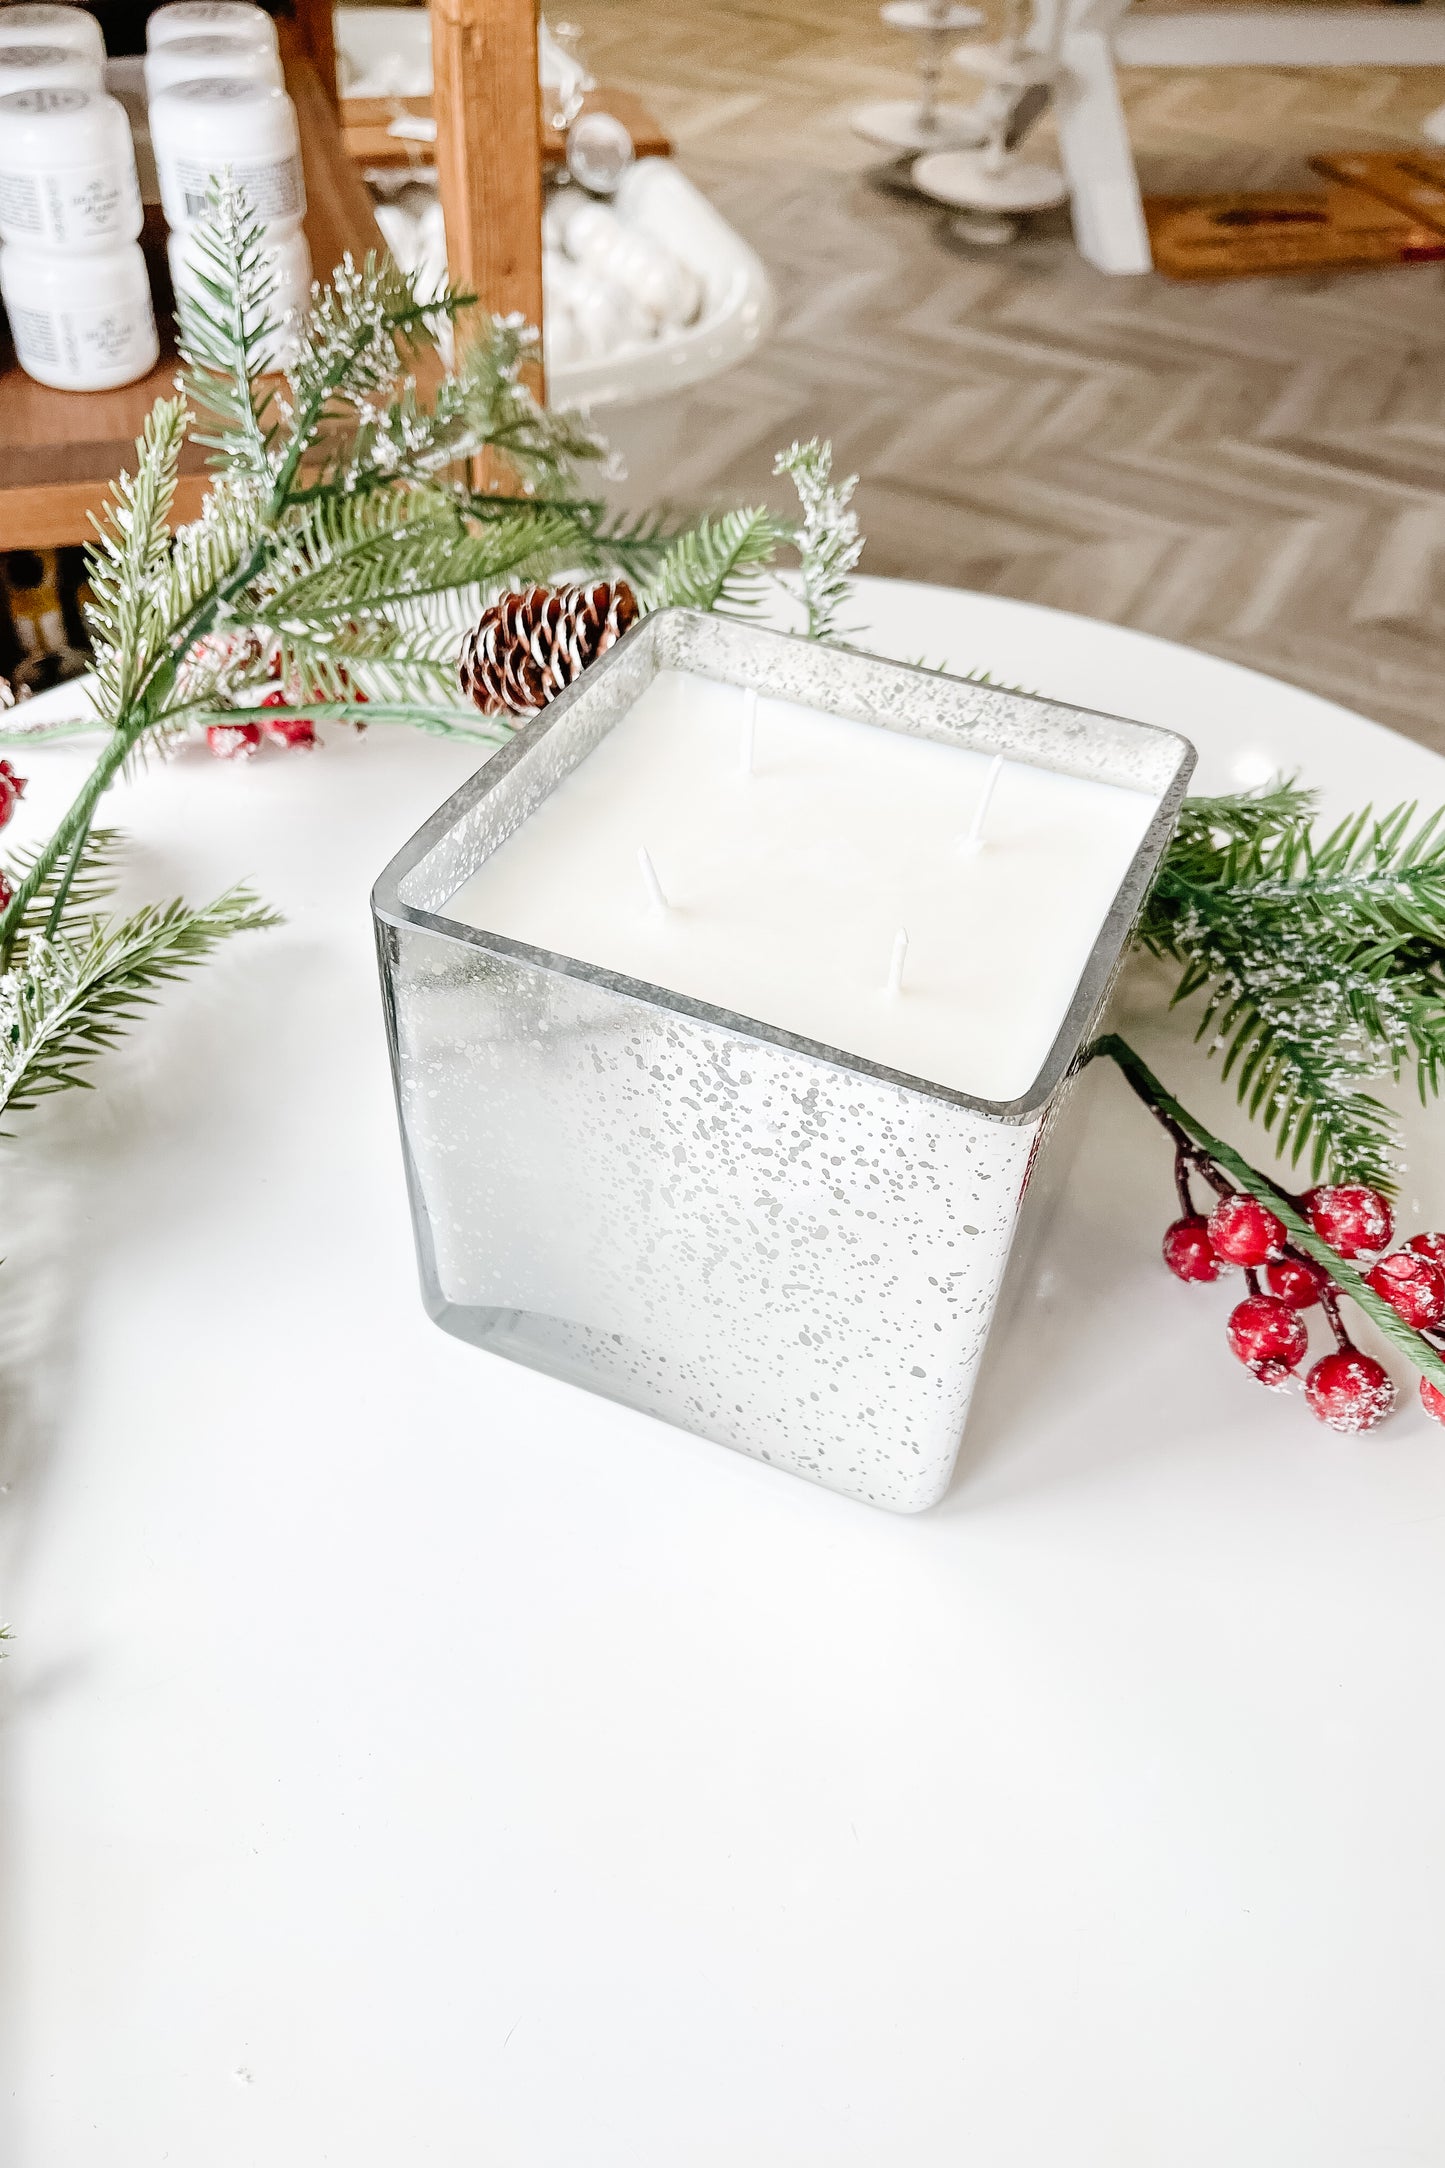 SLEIGH RIDE Silver Speckle 4 wick Soy Wax Candle